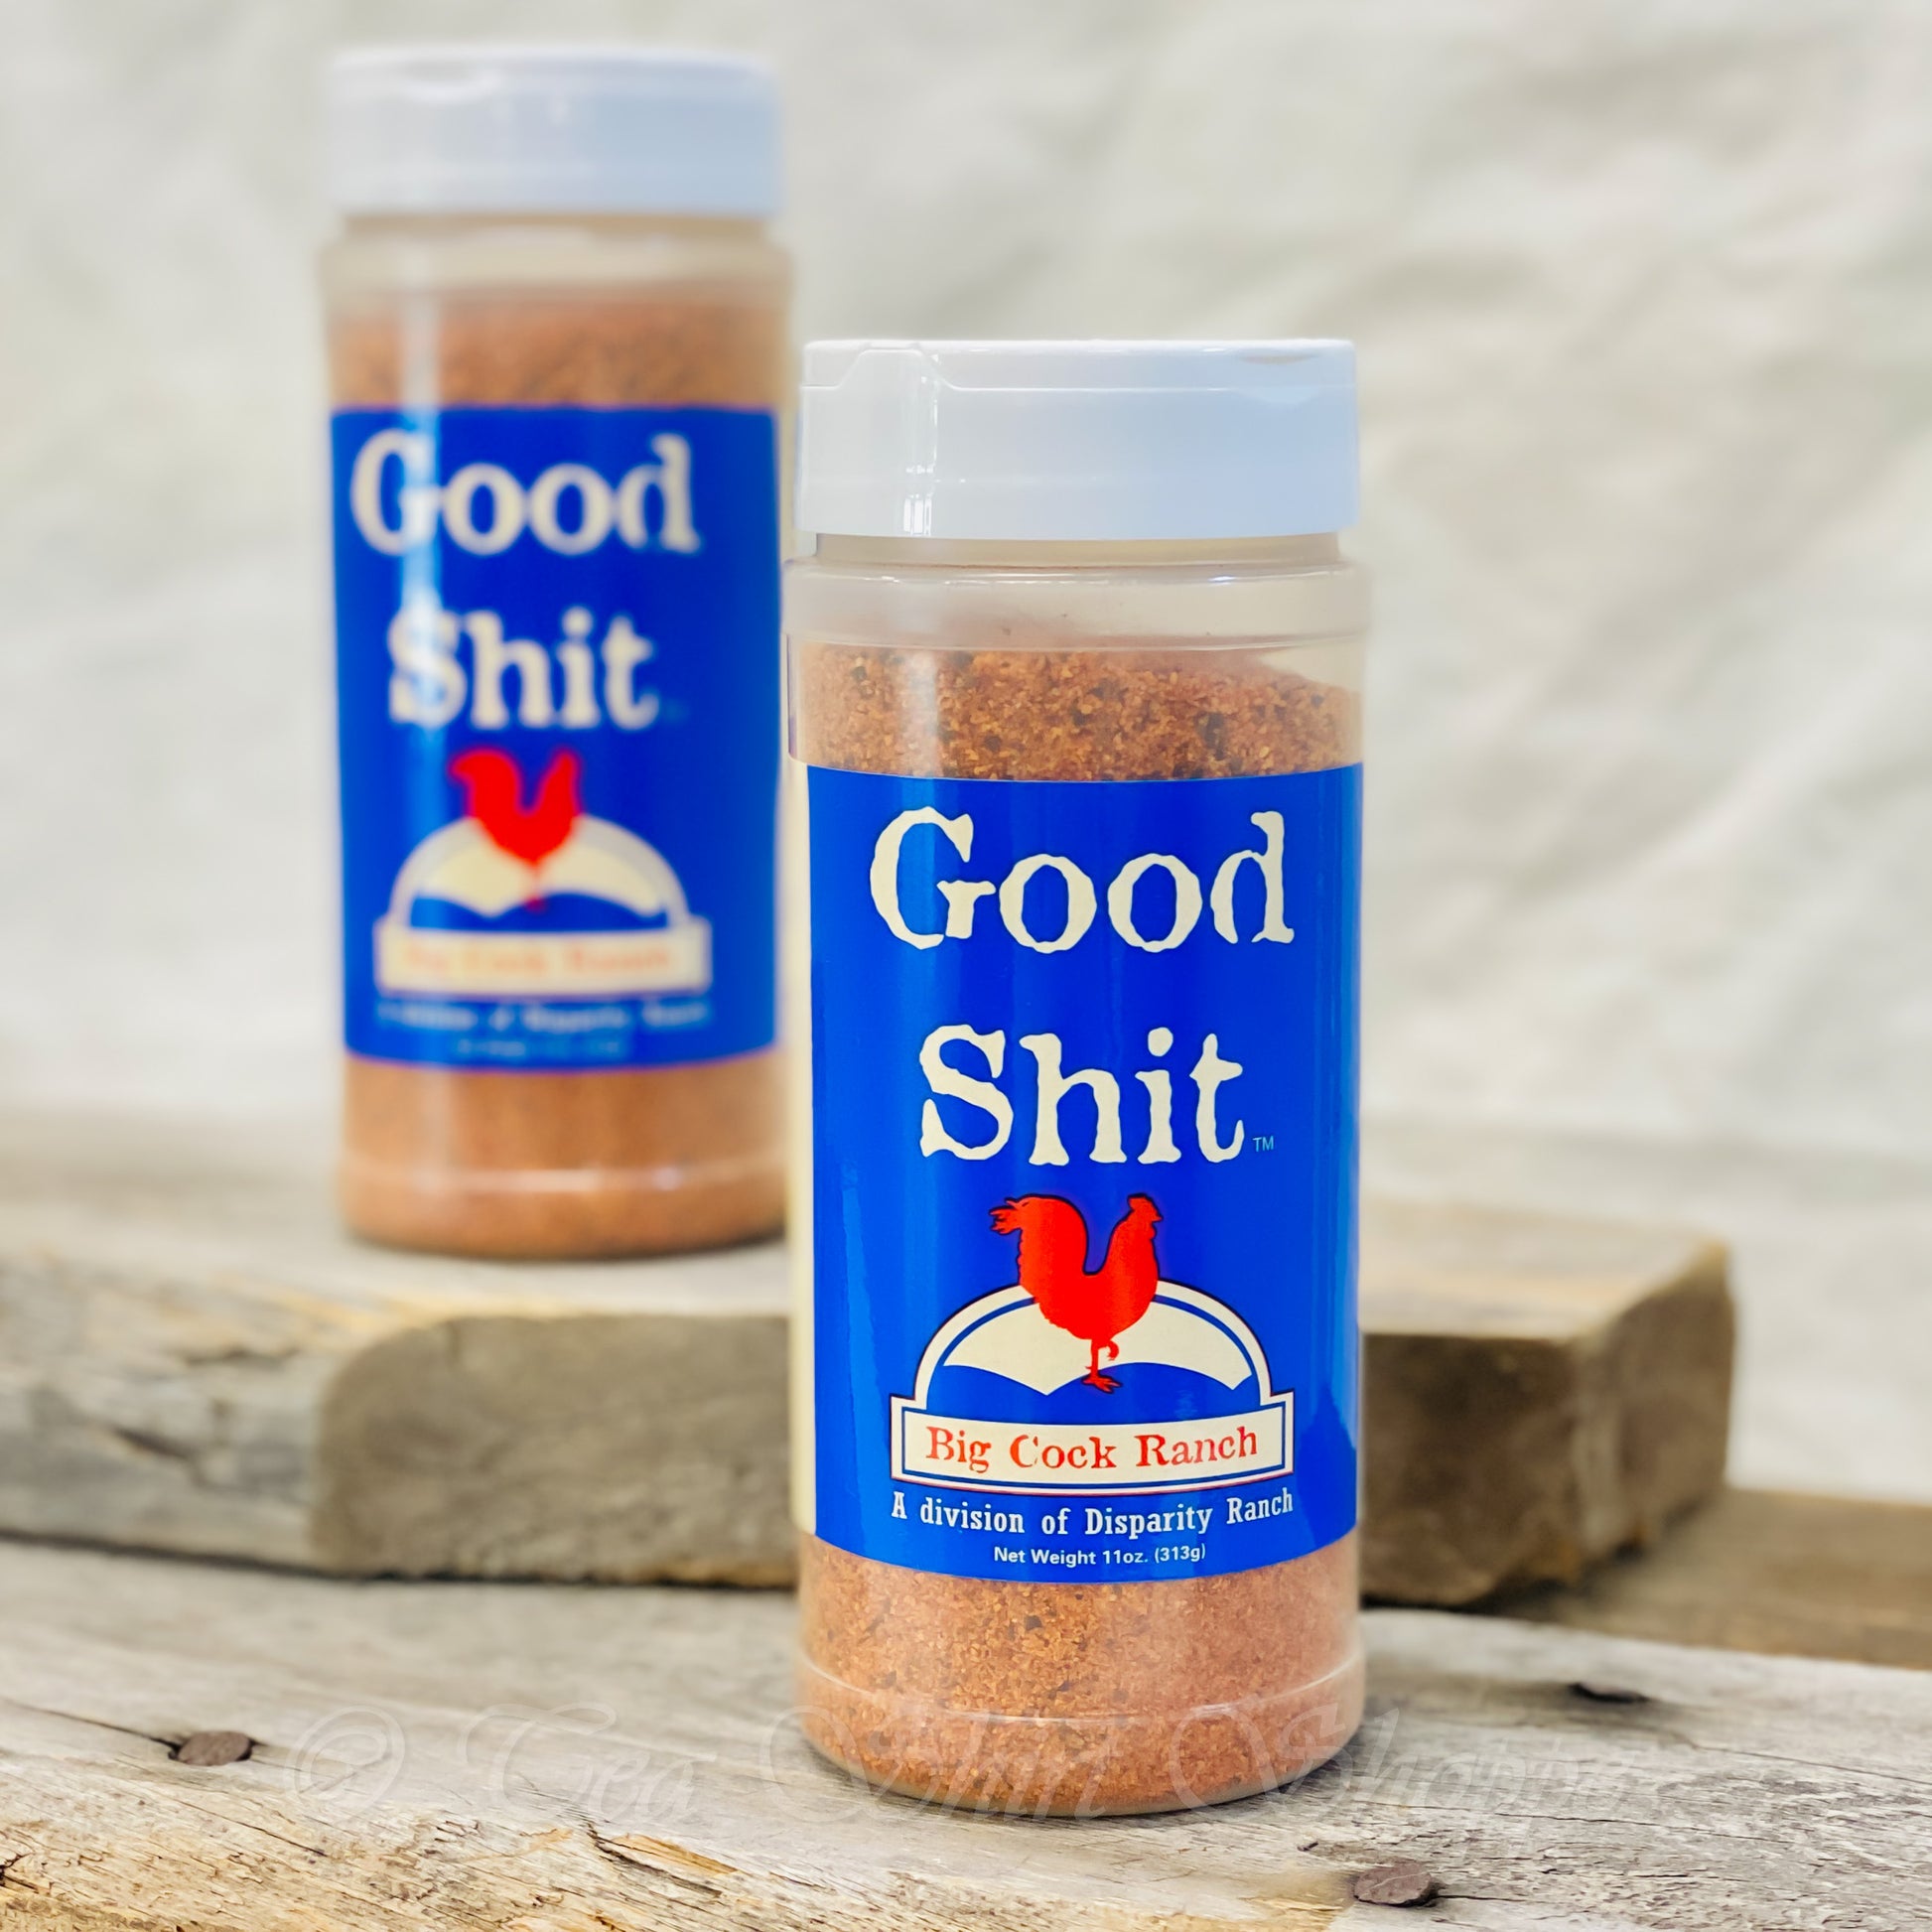 Taste the sweet difference! Good Shit Sweet n’ Salty Seasoning is a specially blended formula designed to bring sweetness to the palate like no other seasoning does.